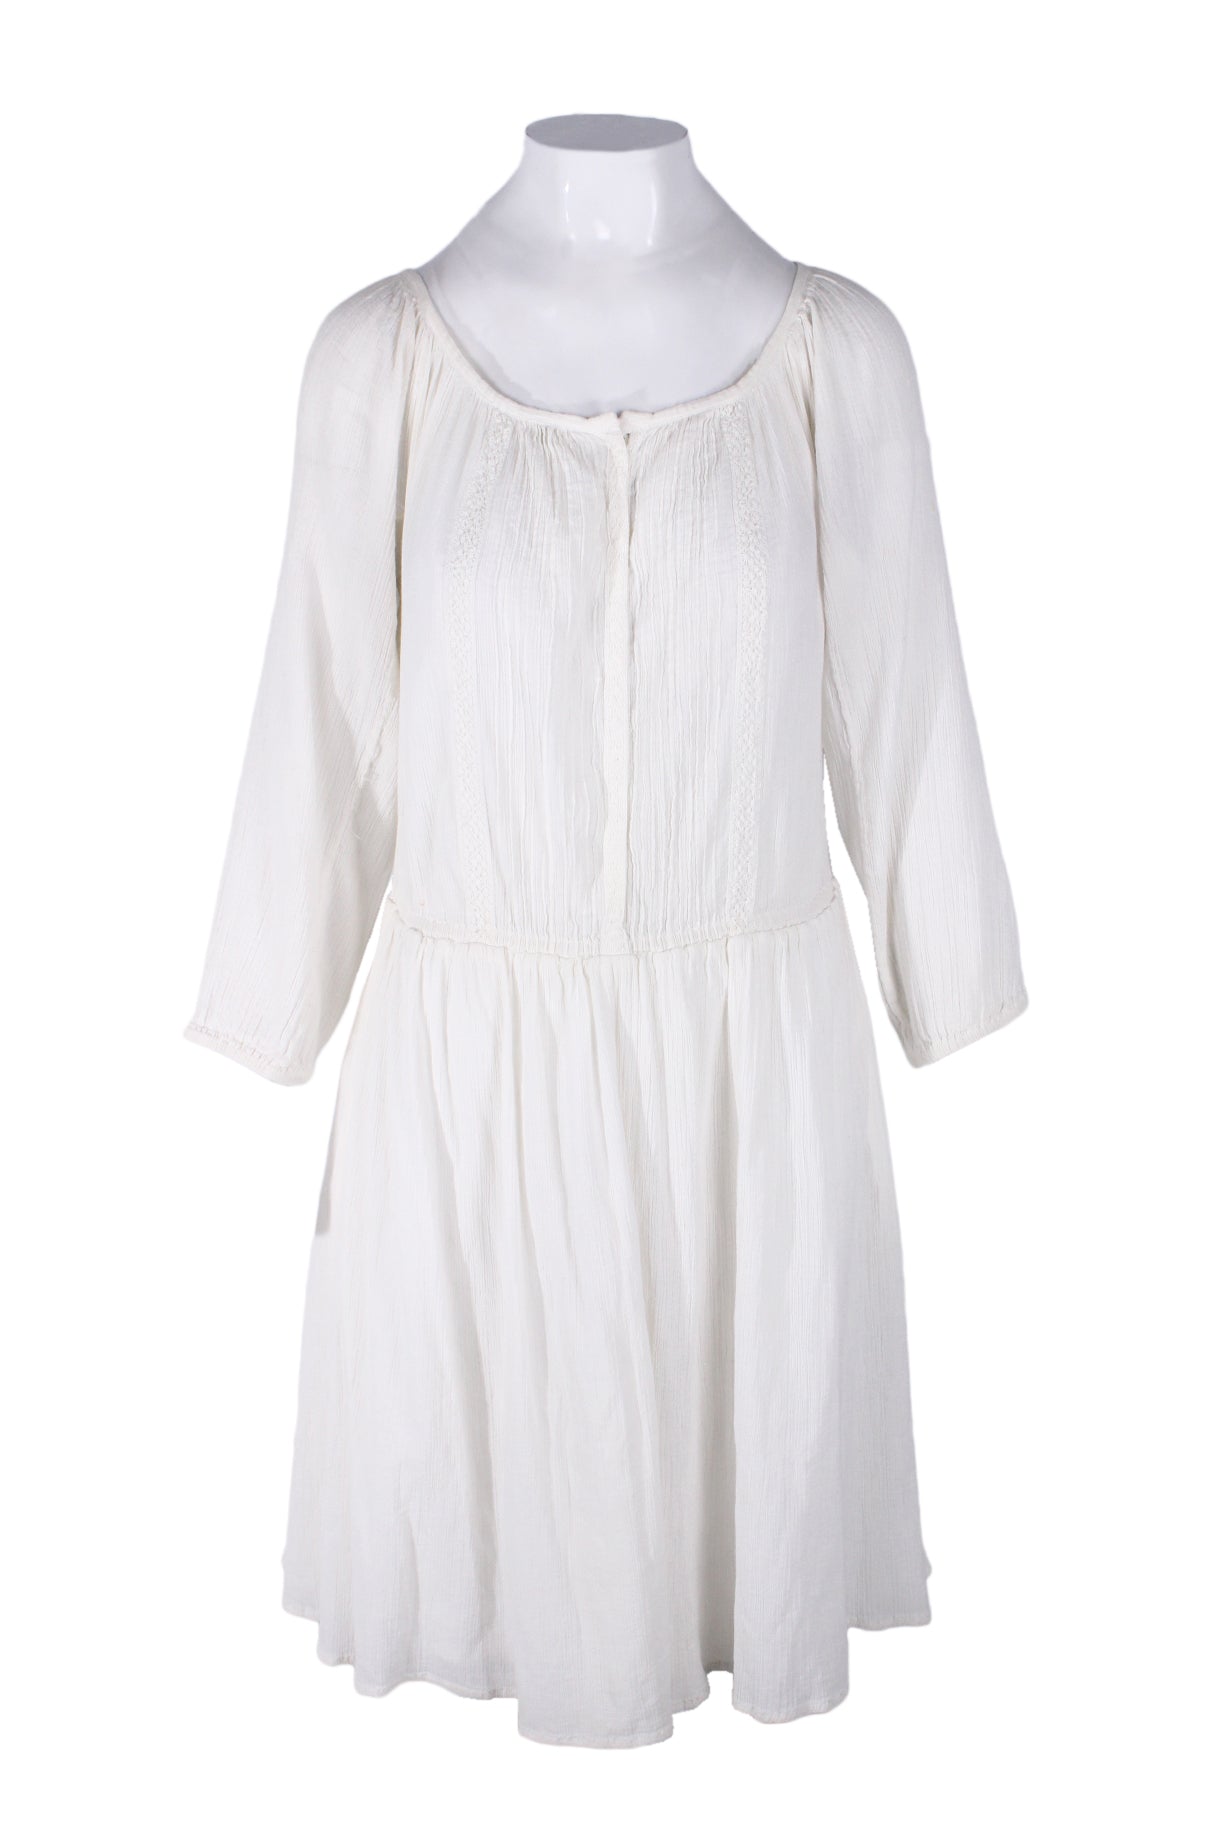 description: etoile isabel marant white long sleeve dress. features rounded neckline, eyelet fabric design elements throughout, cropped sleeves, side pockets, and cinched waist.